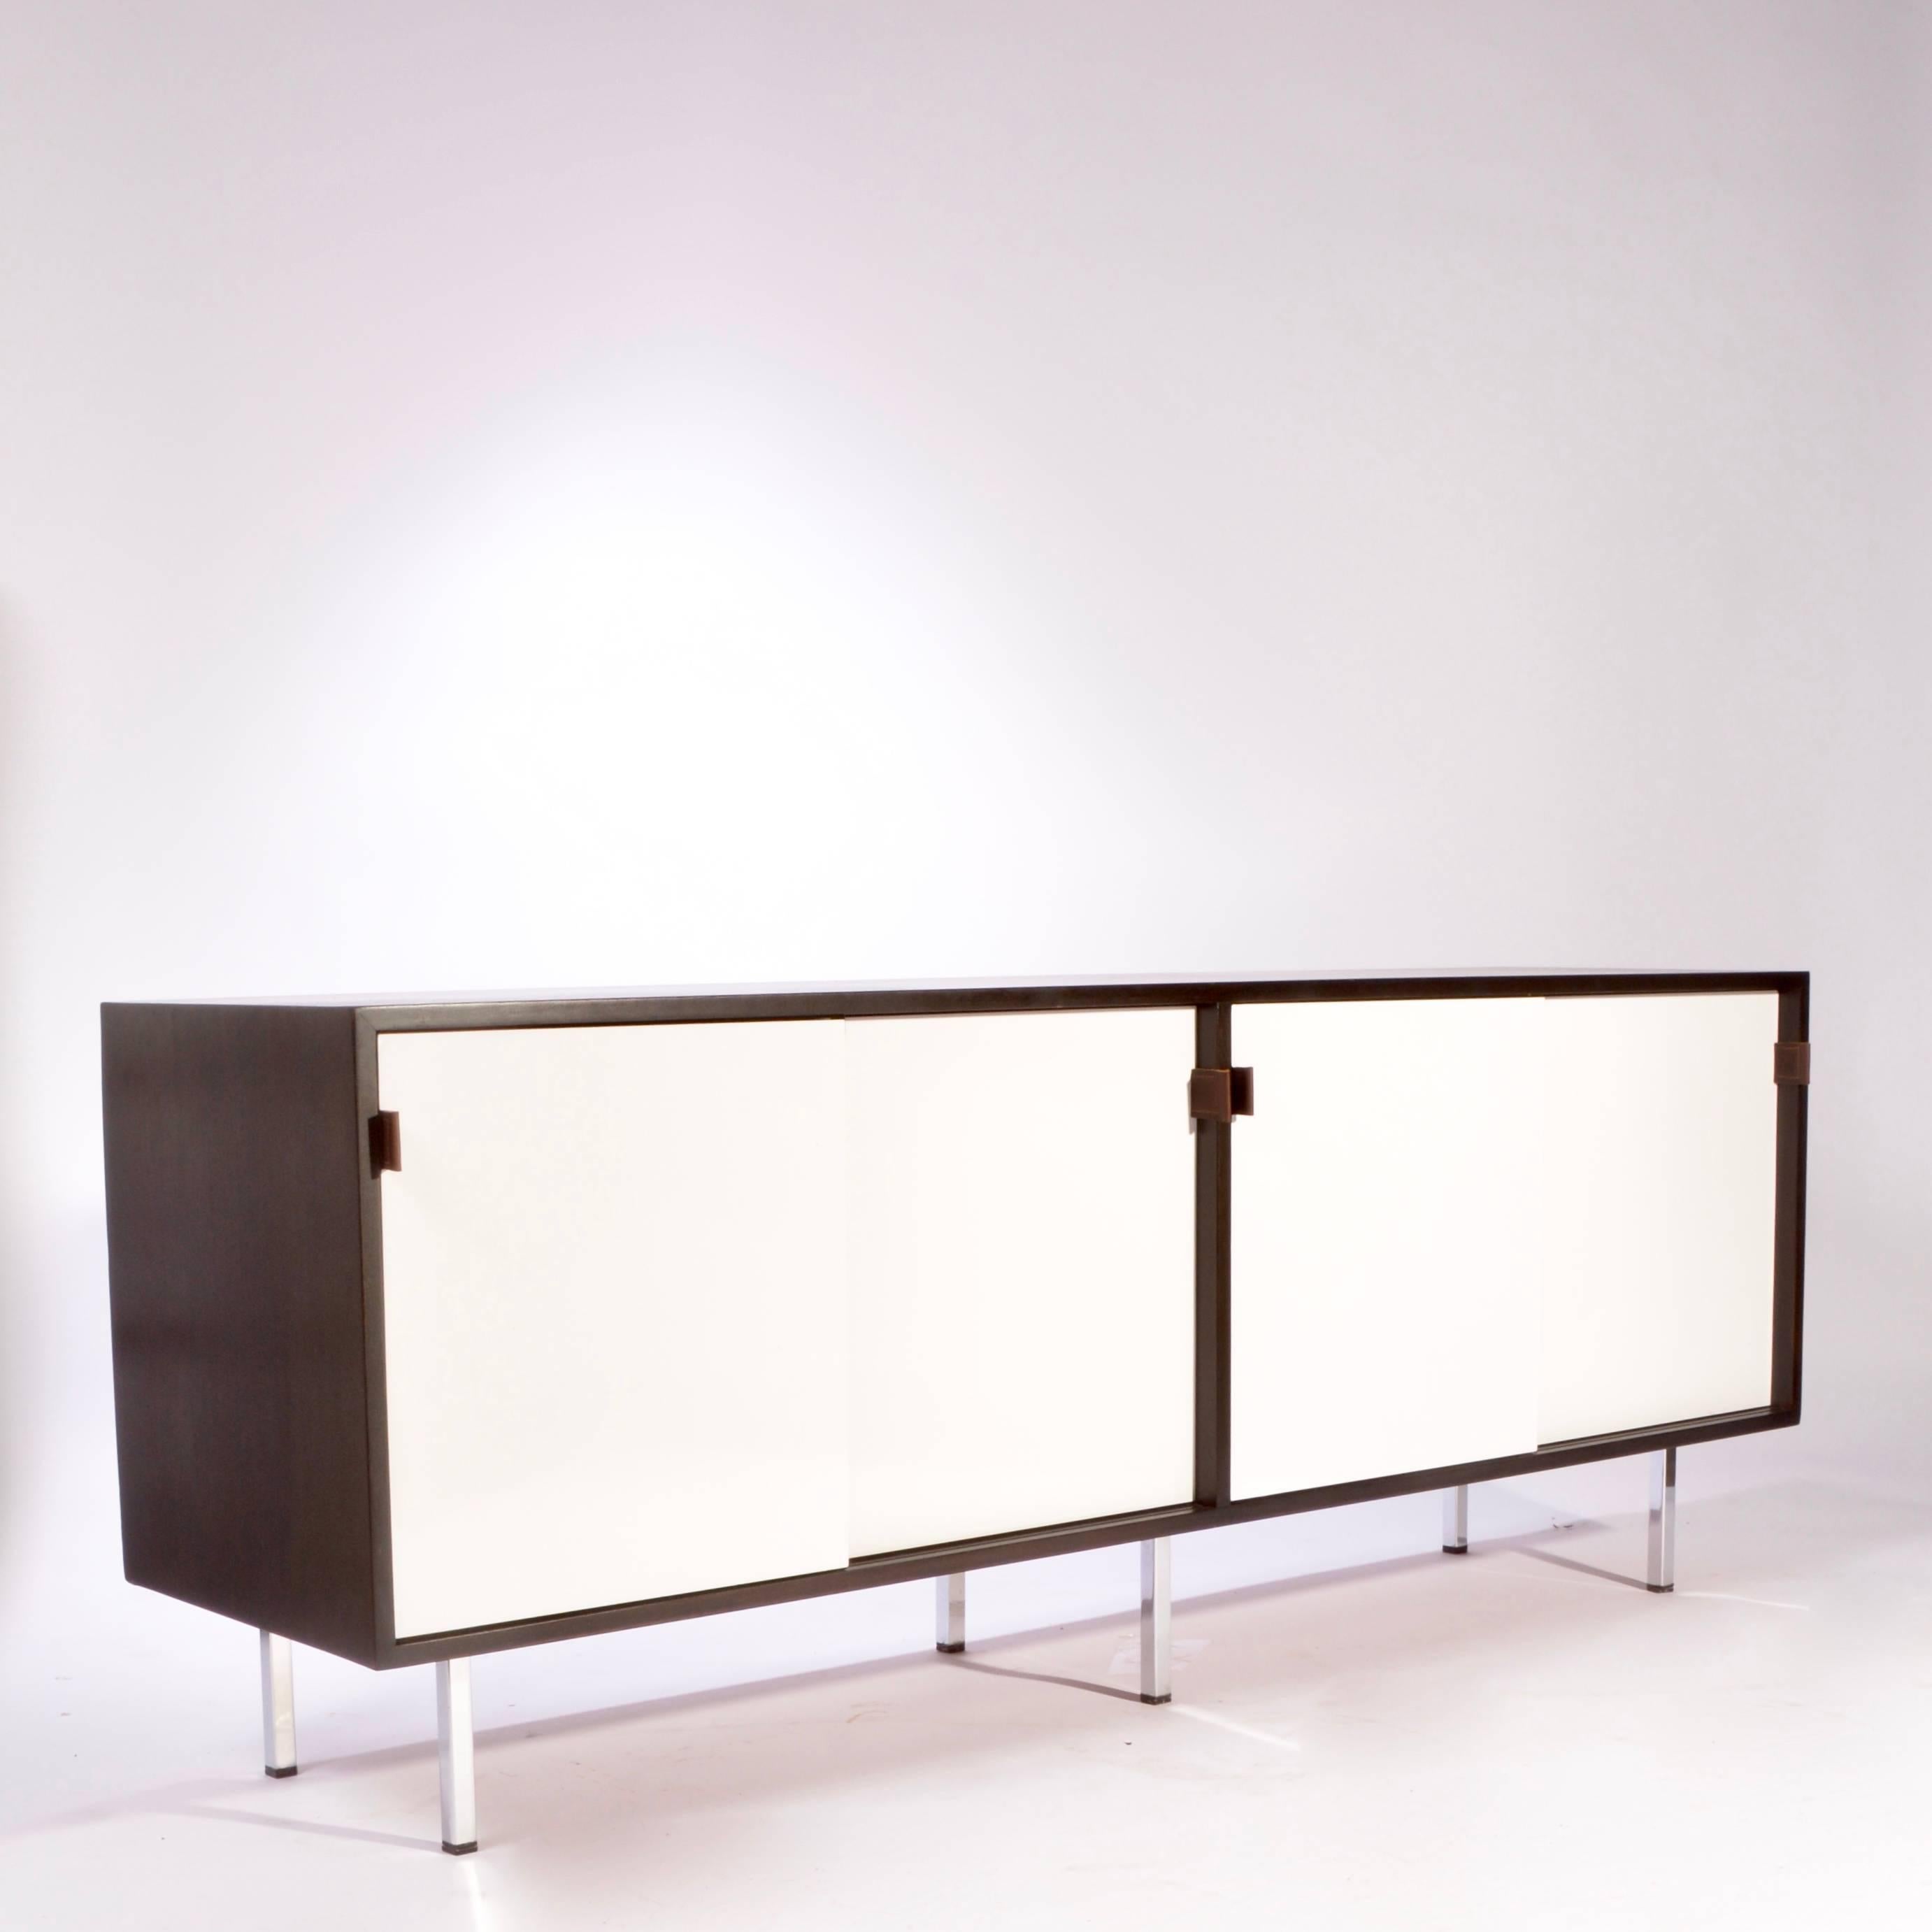 This is a fully restored early Florence Knoll credenza featuring white formica sliding doors, new professional ebonized finish, brown leather pulls, chrome legs and solid oak drawers. We have two in stock and can offer a range of interior options